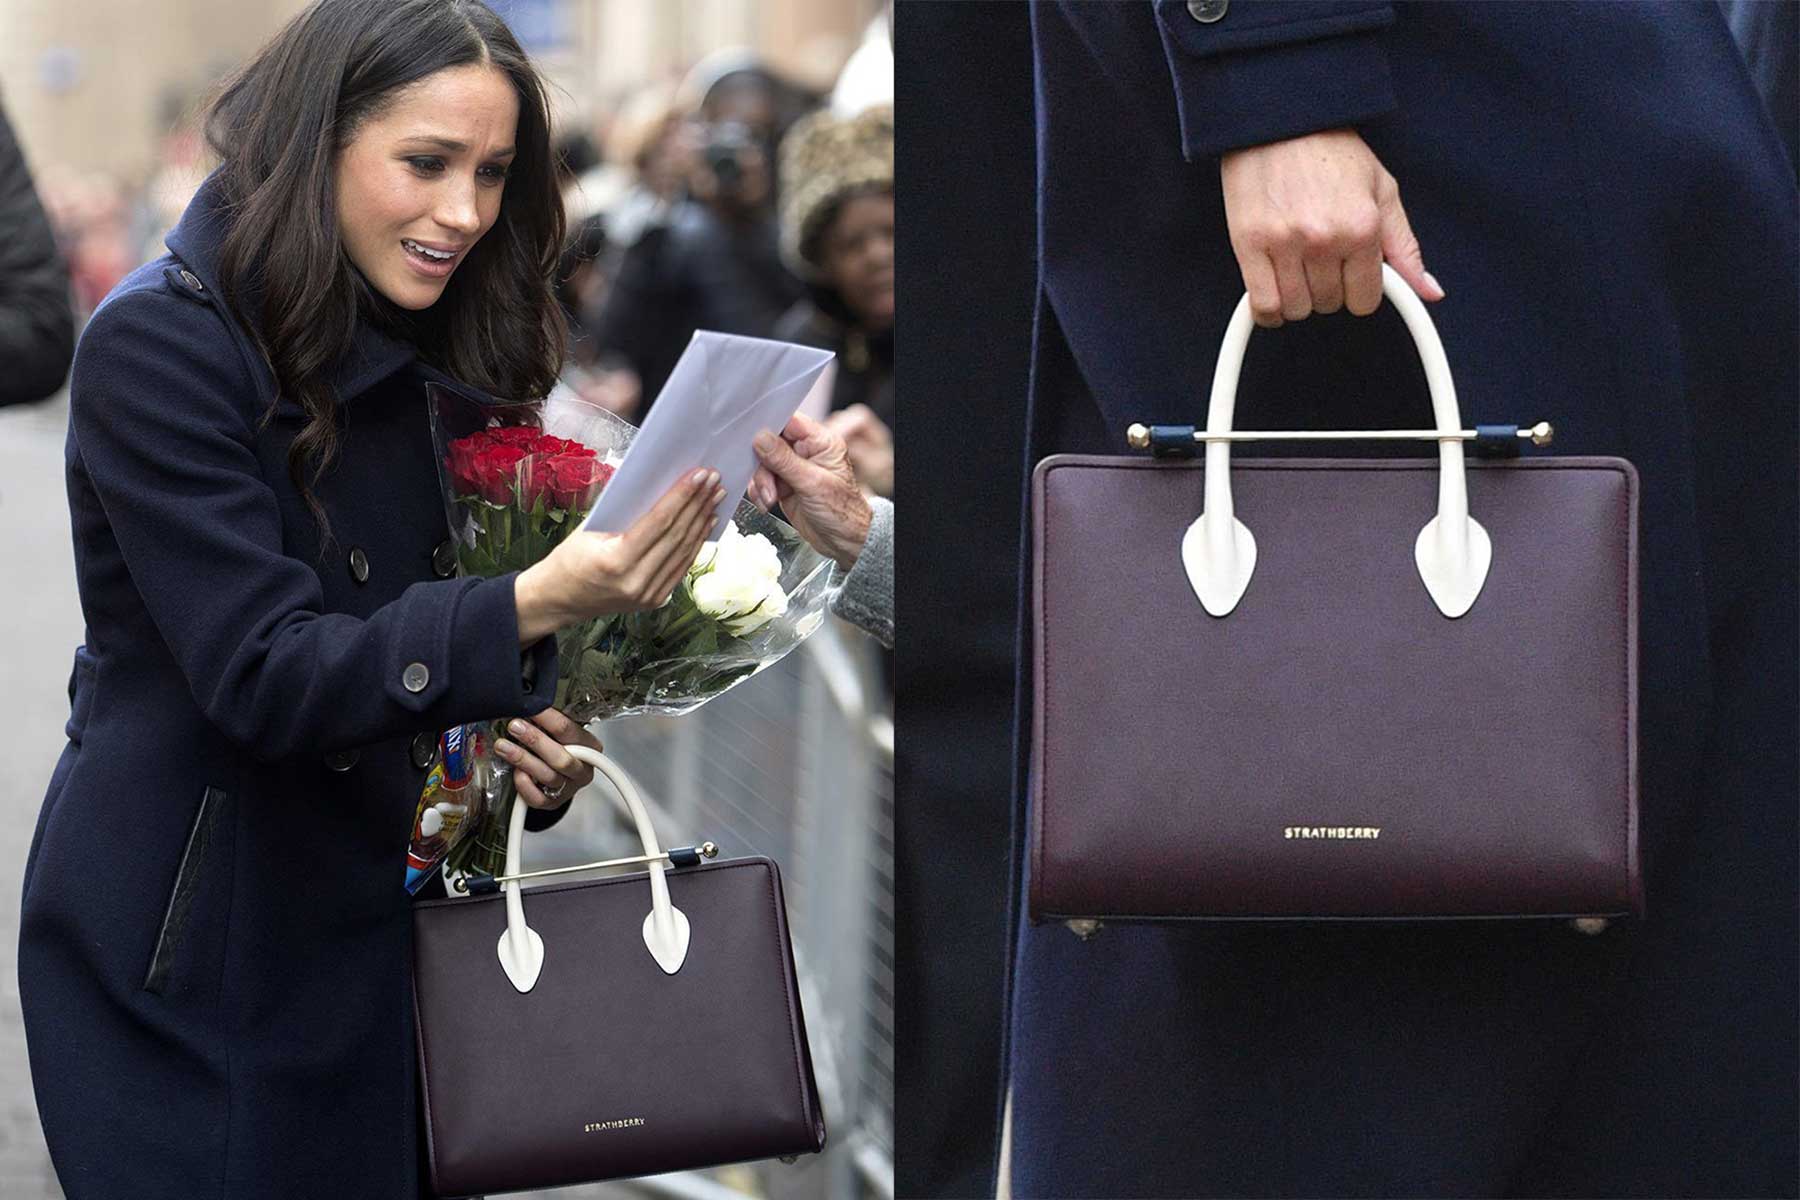 Strathberry - The making of the Meghan Markle bag 